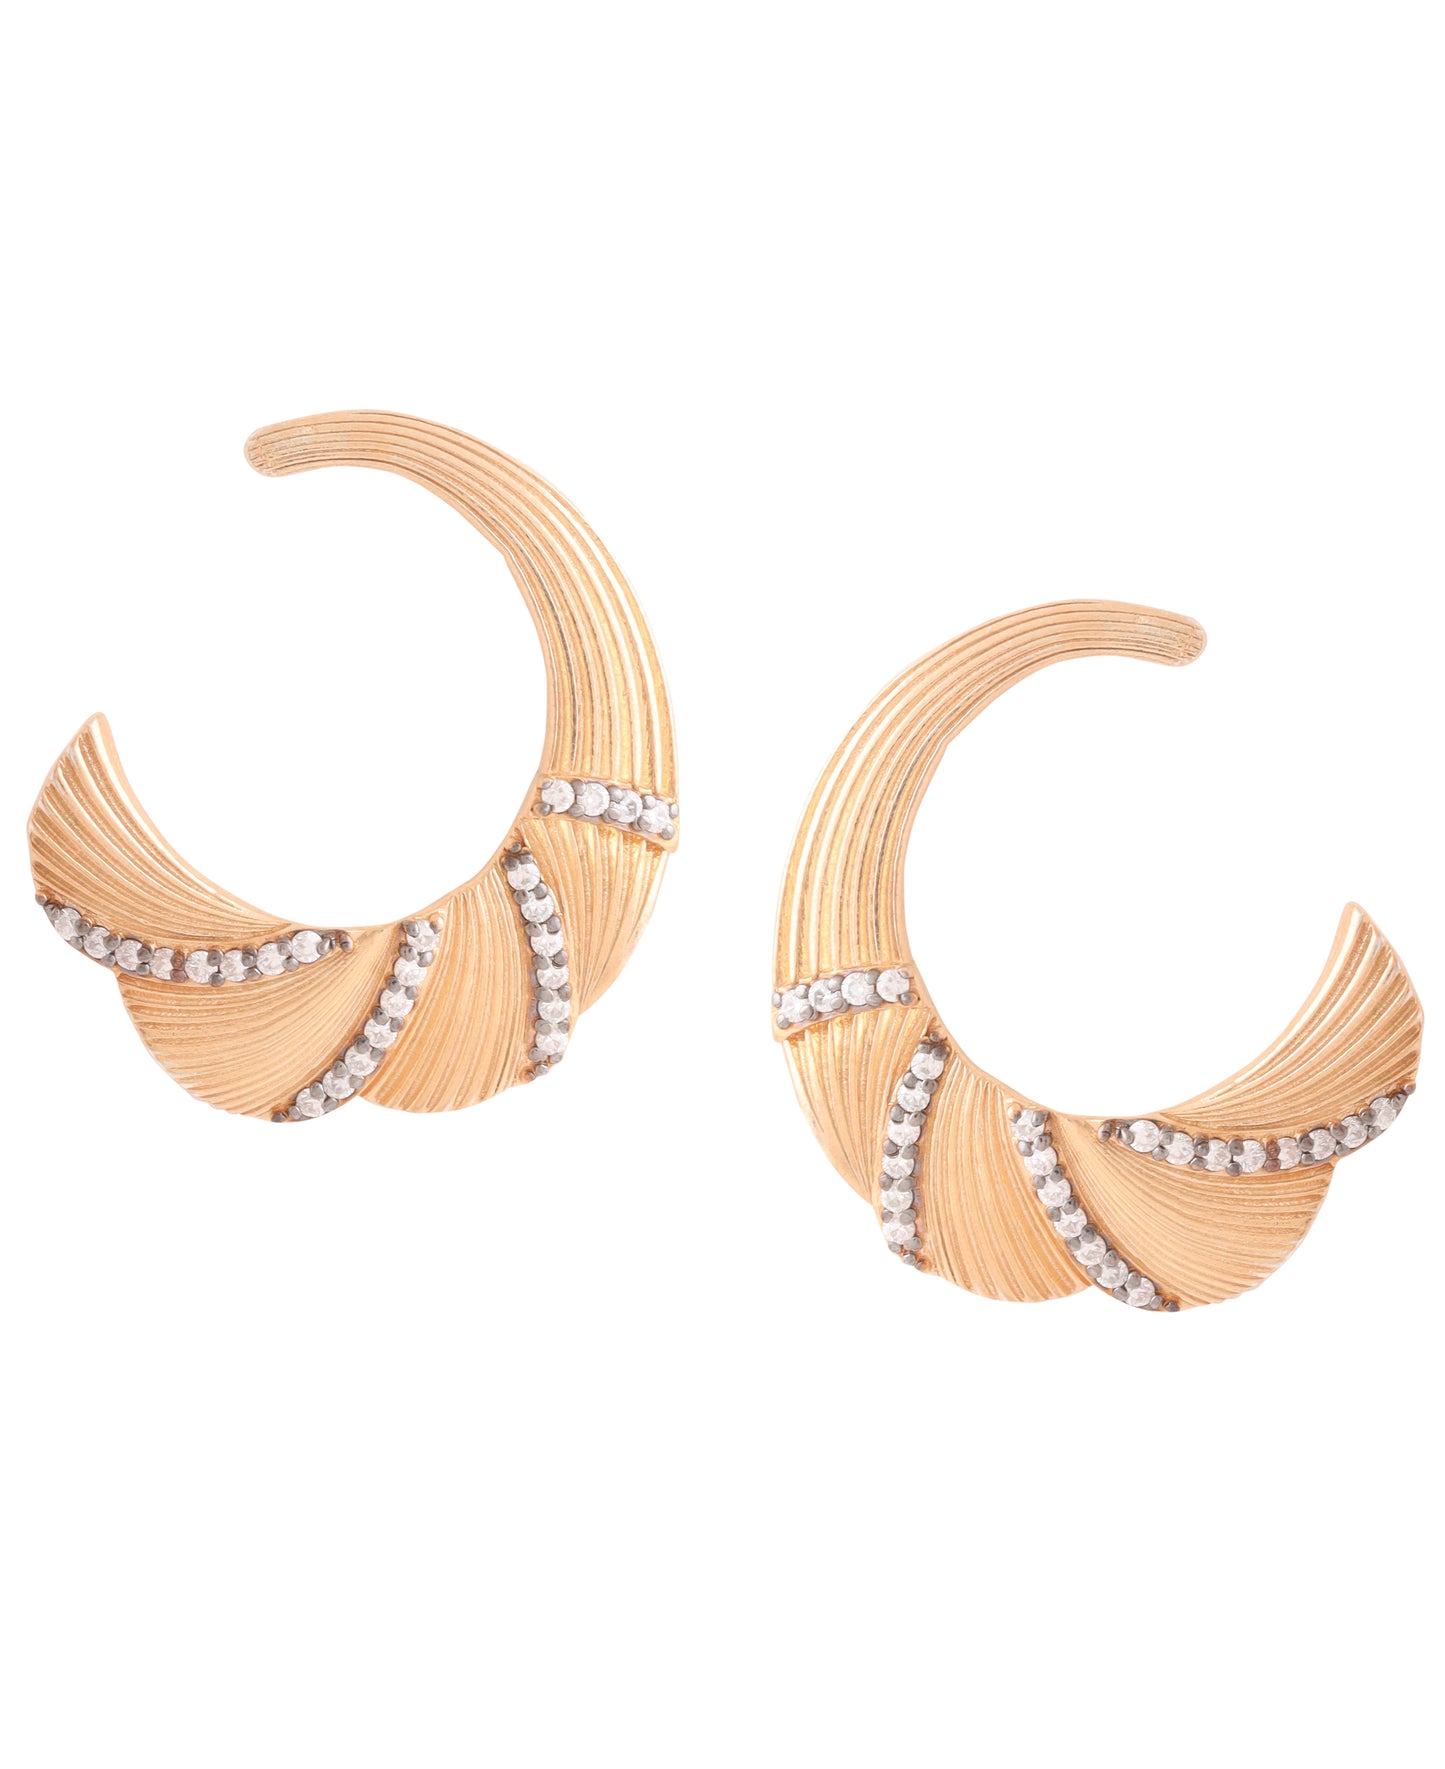 Kicky and Perky 925 Sterling silver Rose Gold Mossanite Hoop Earring for Women